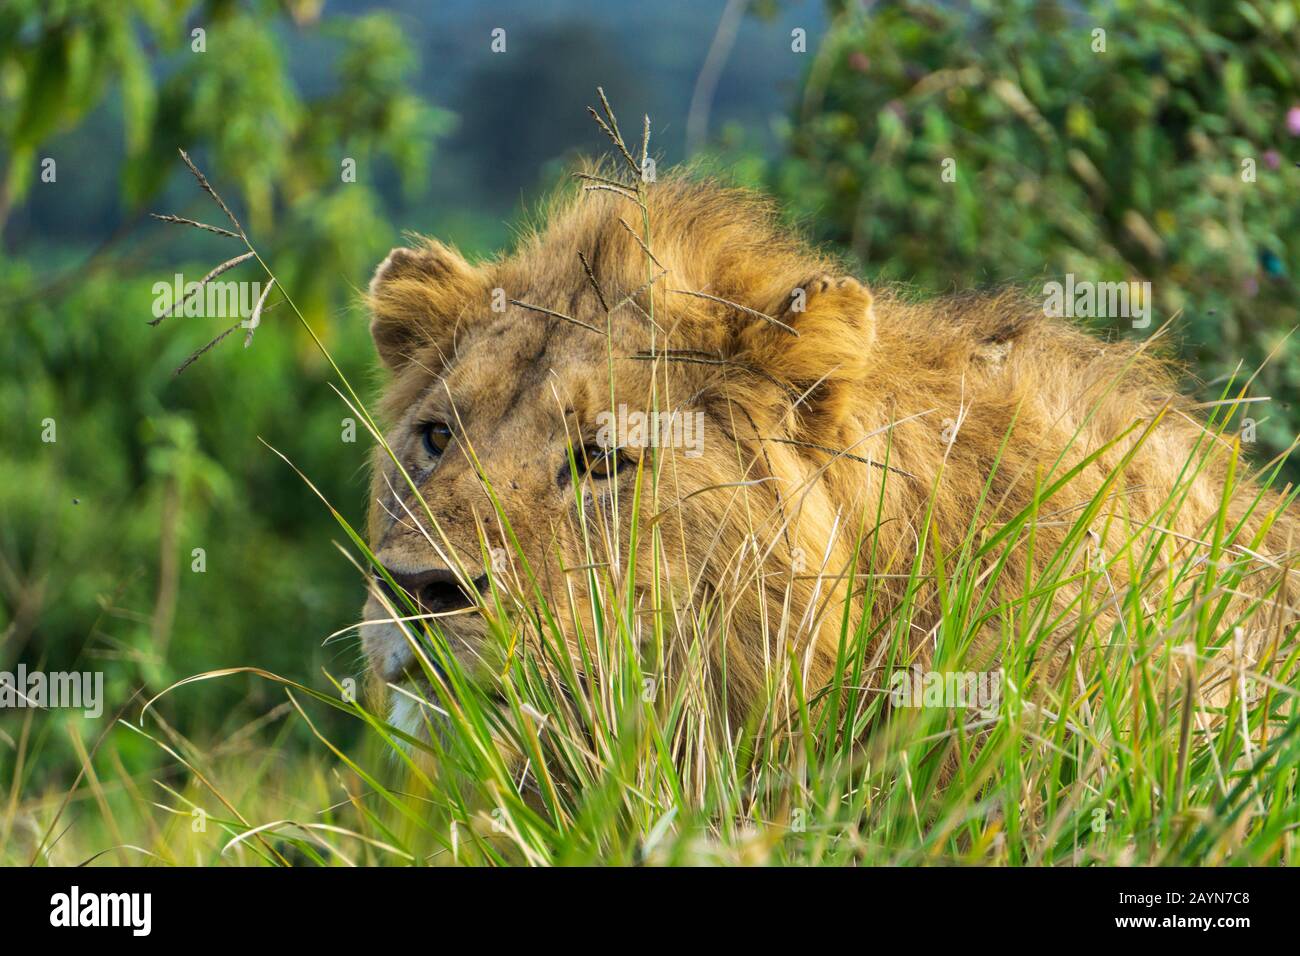 Male Lion watching through the grass in Ngorongoro Conservation Area, Tanzania, Africa Stock Photo